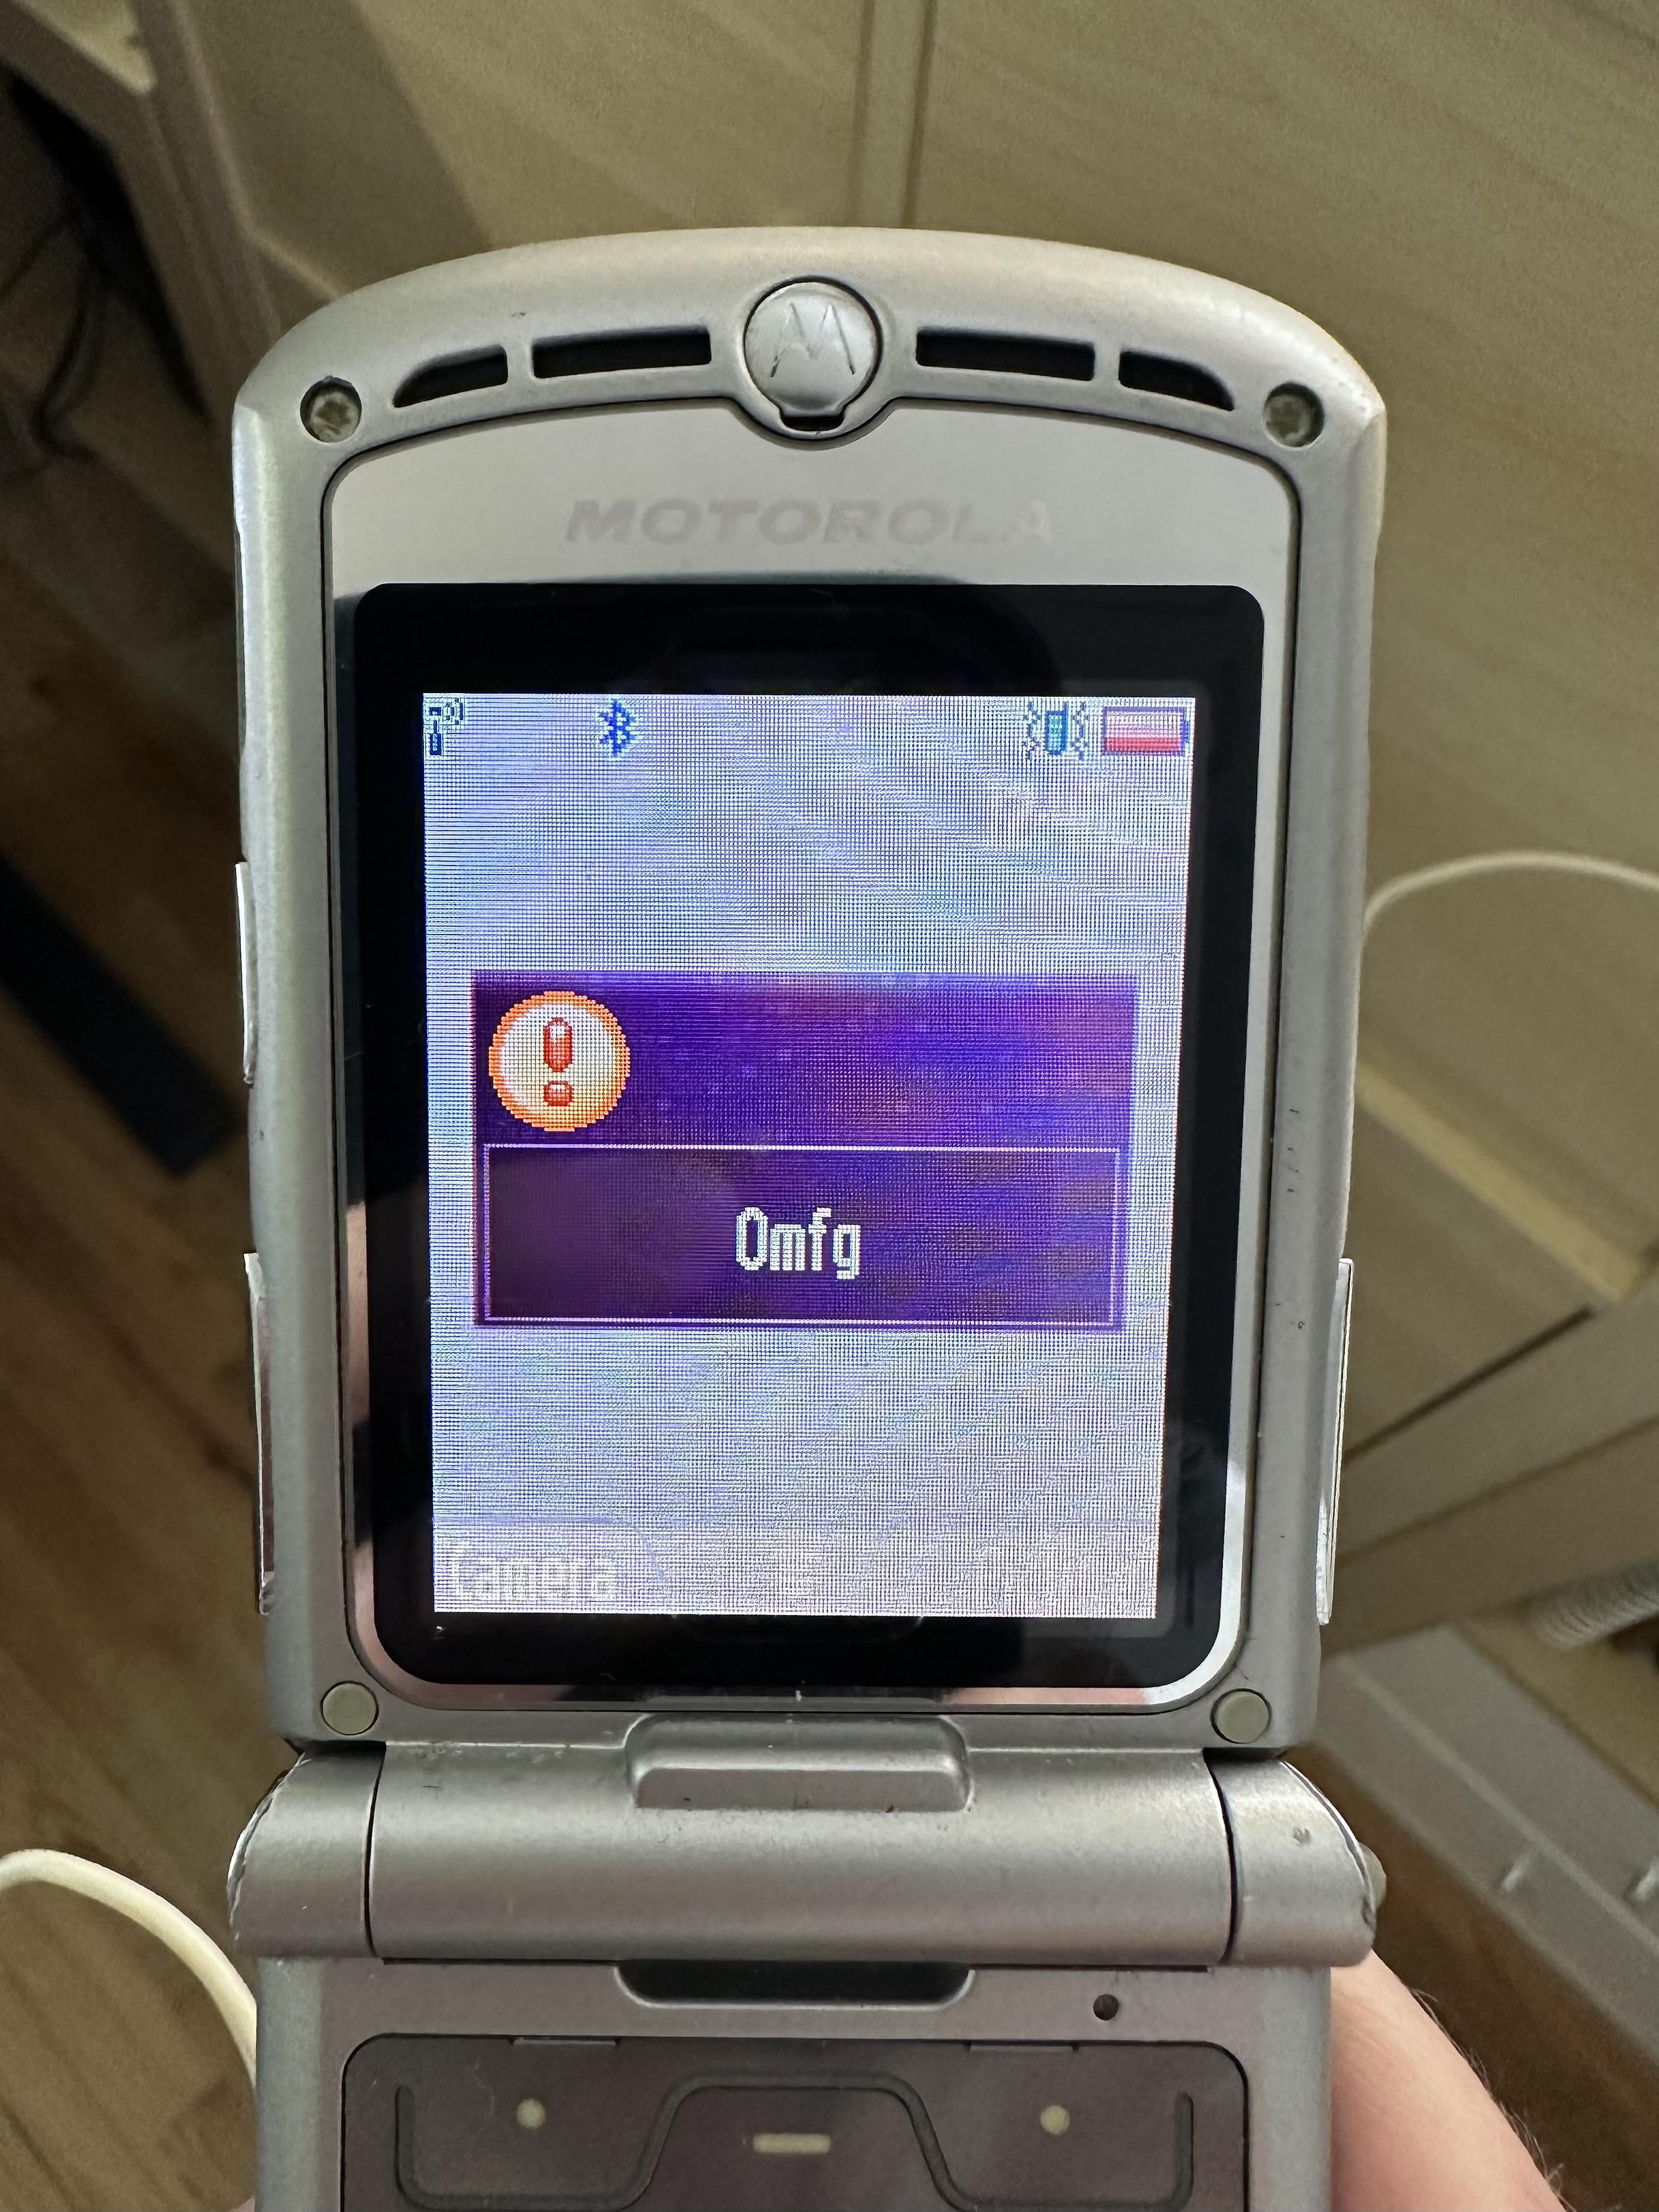 Turned on my old Razr and this is the error it gives me before spontaneously shutting down again.